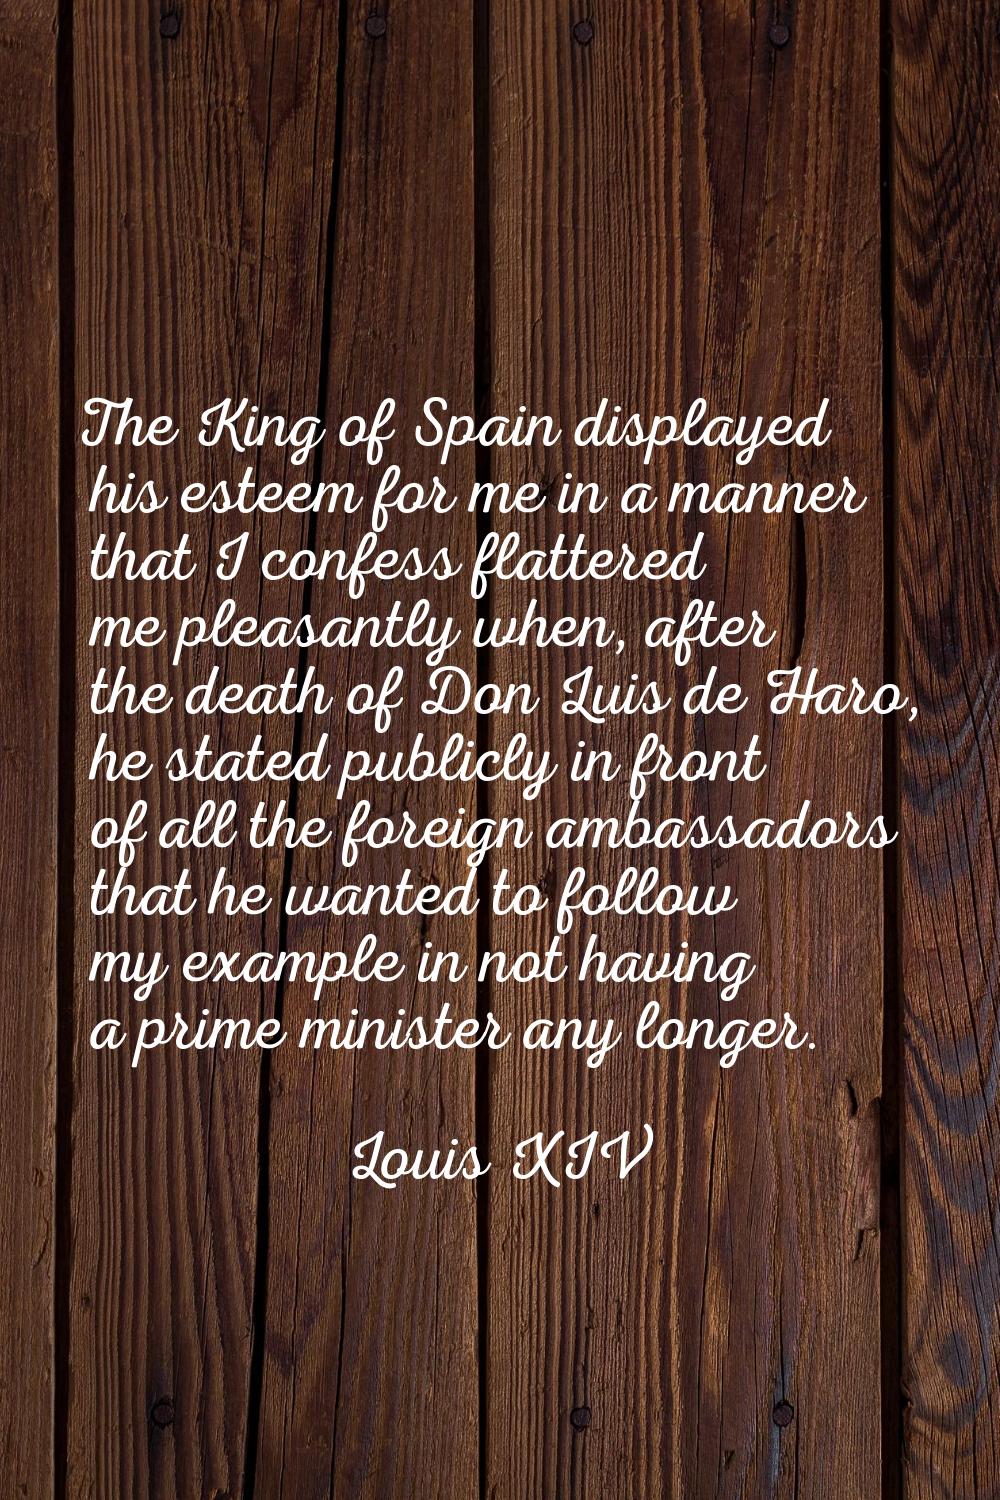 The King of Spain displayed his esteem for me in a manner that I confess flattered me pleasantly wh